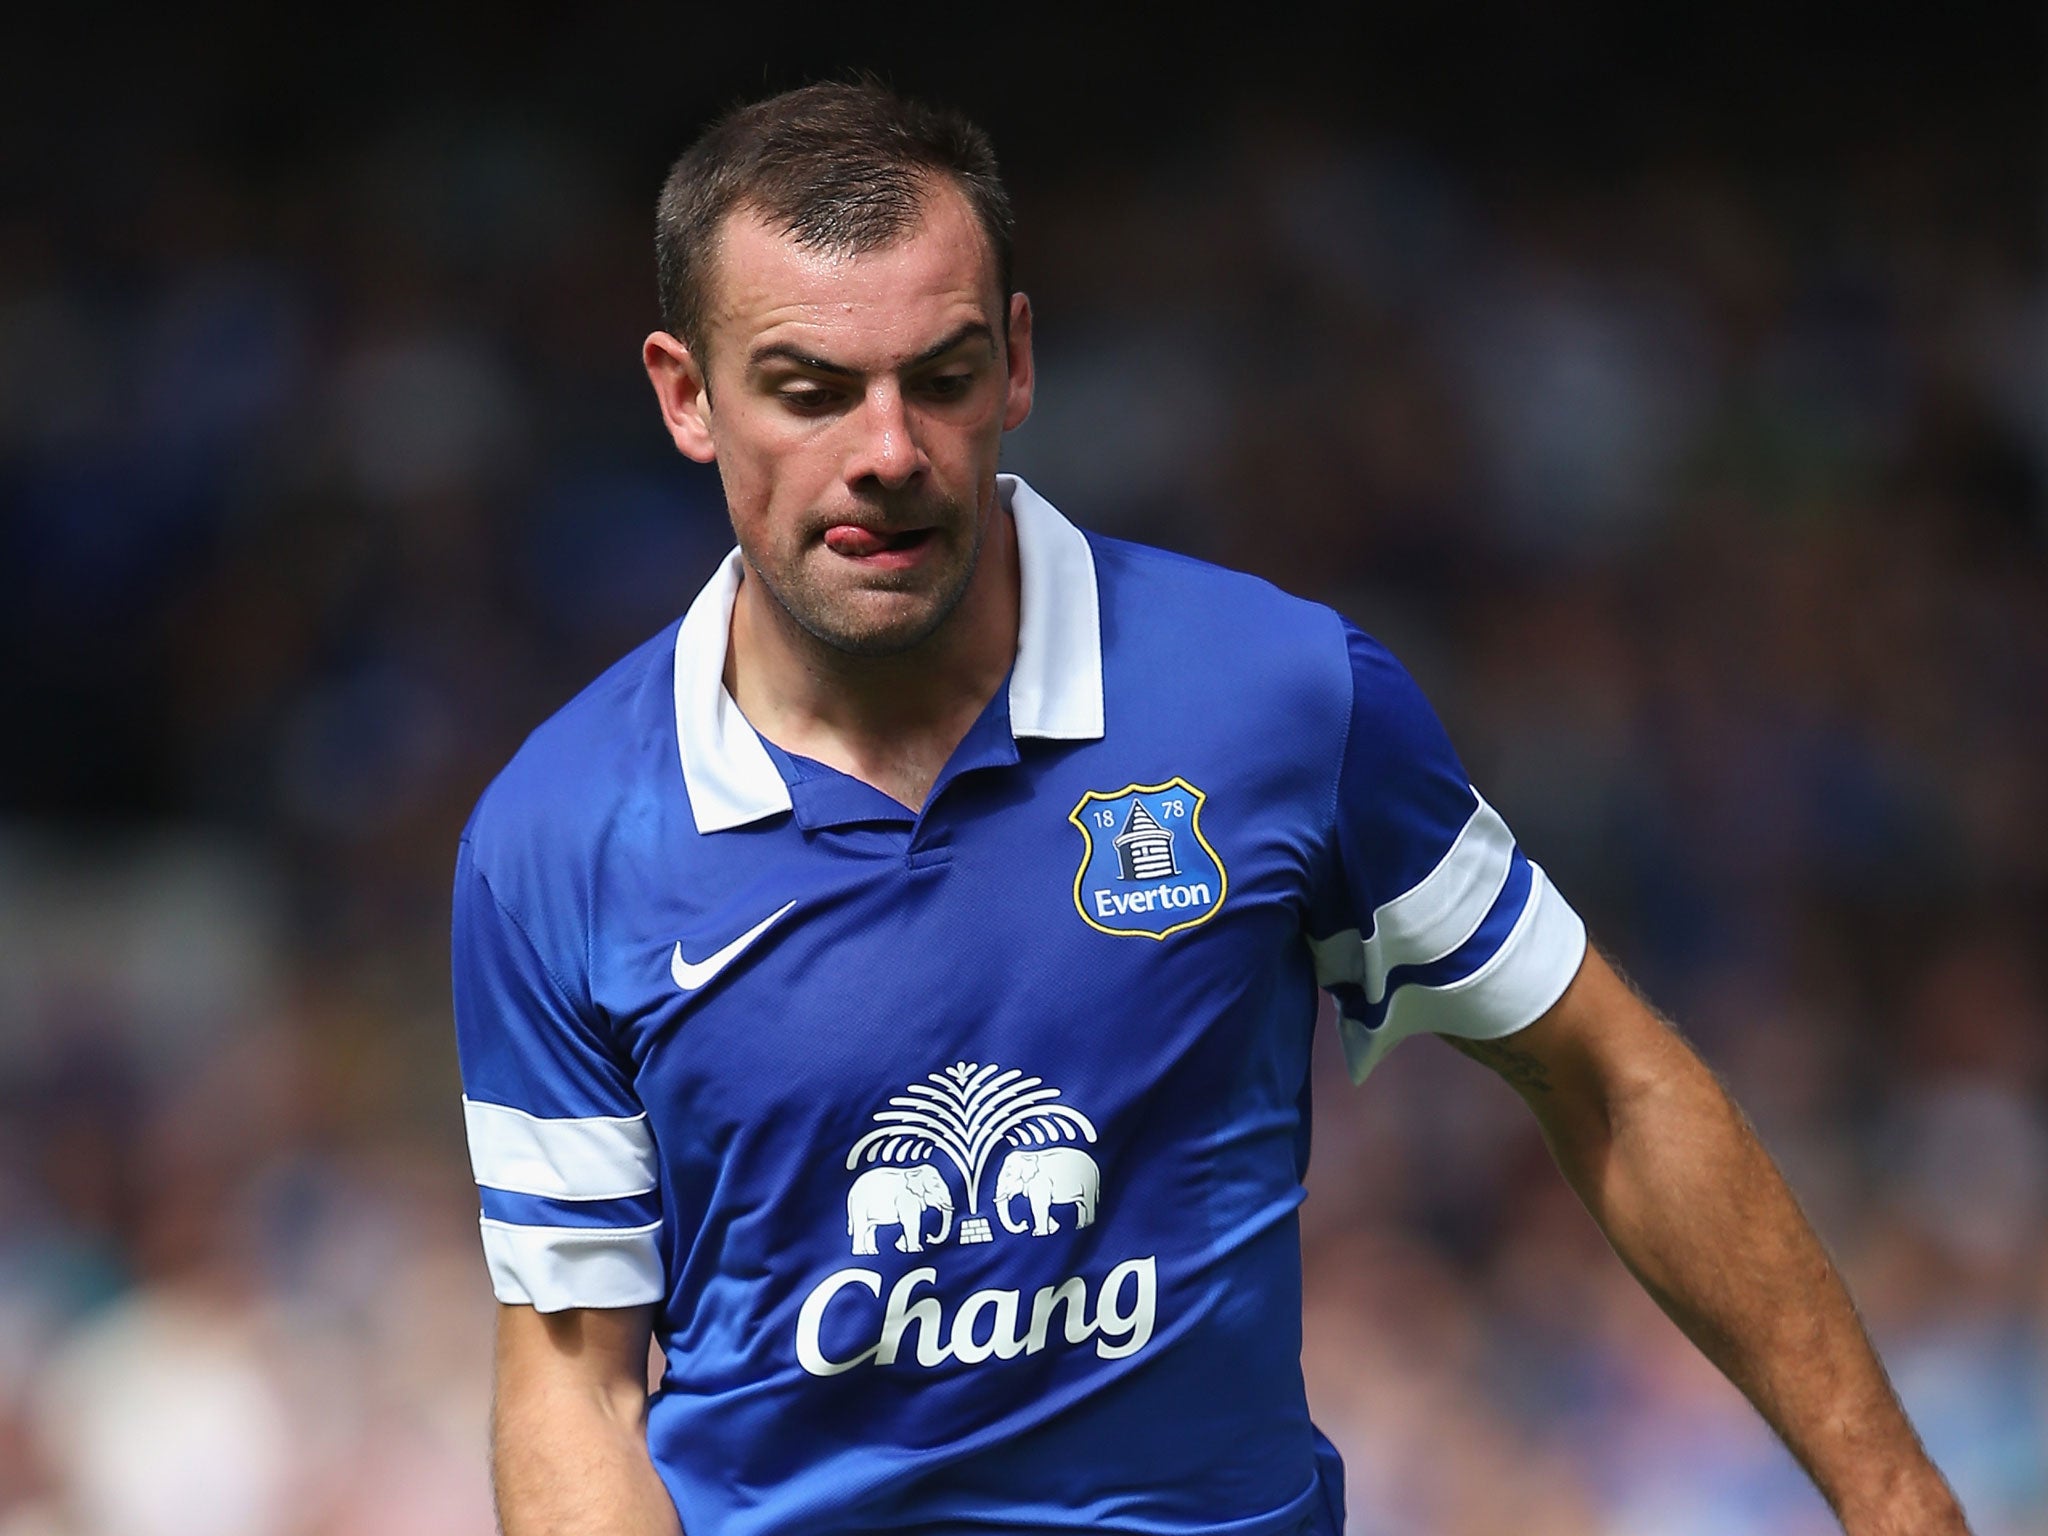 Darron Gibson is expected to miss the match against West Brom with a knee injury